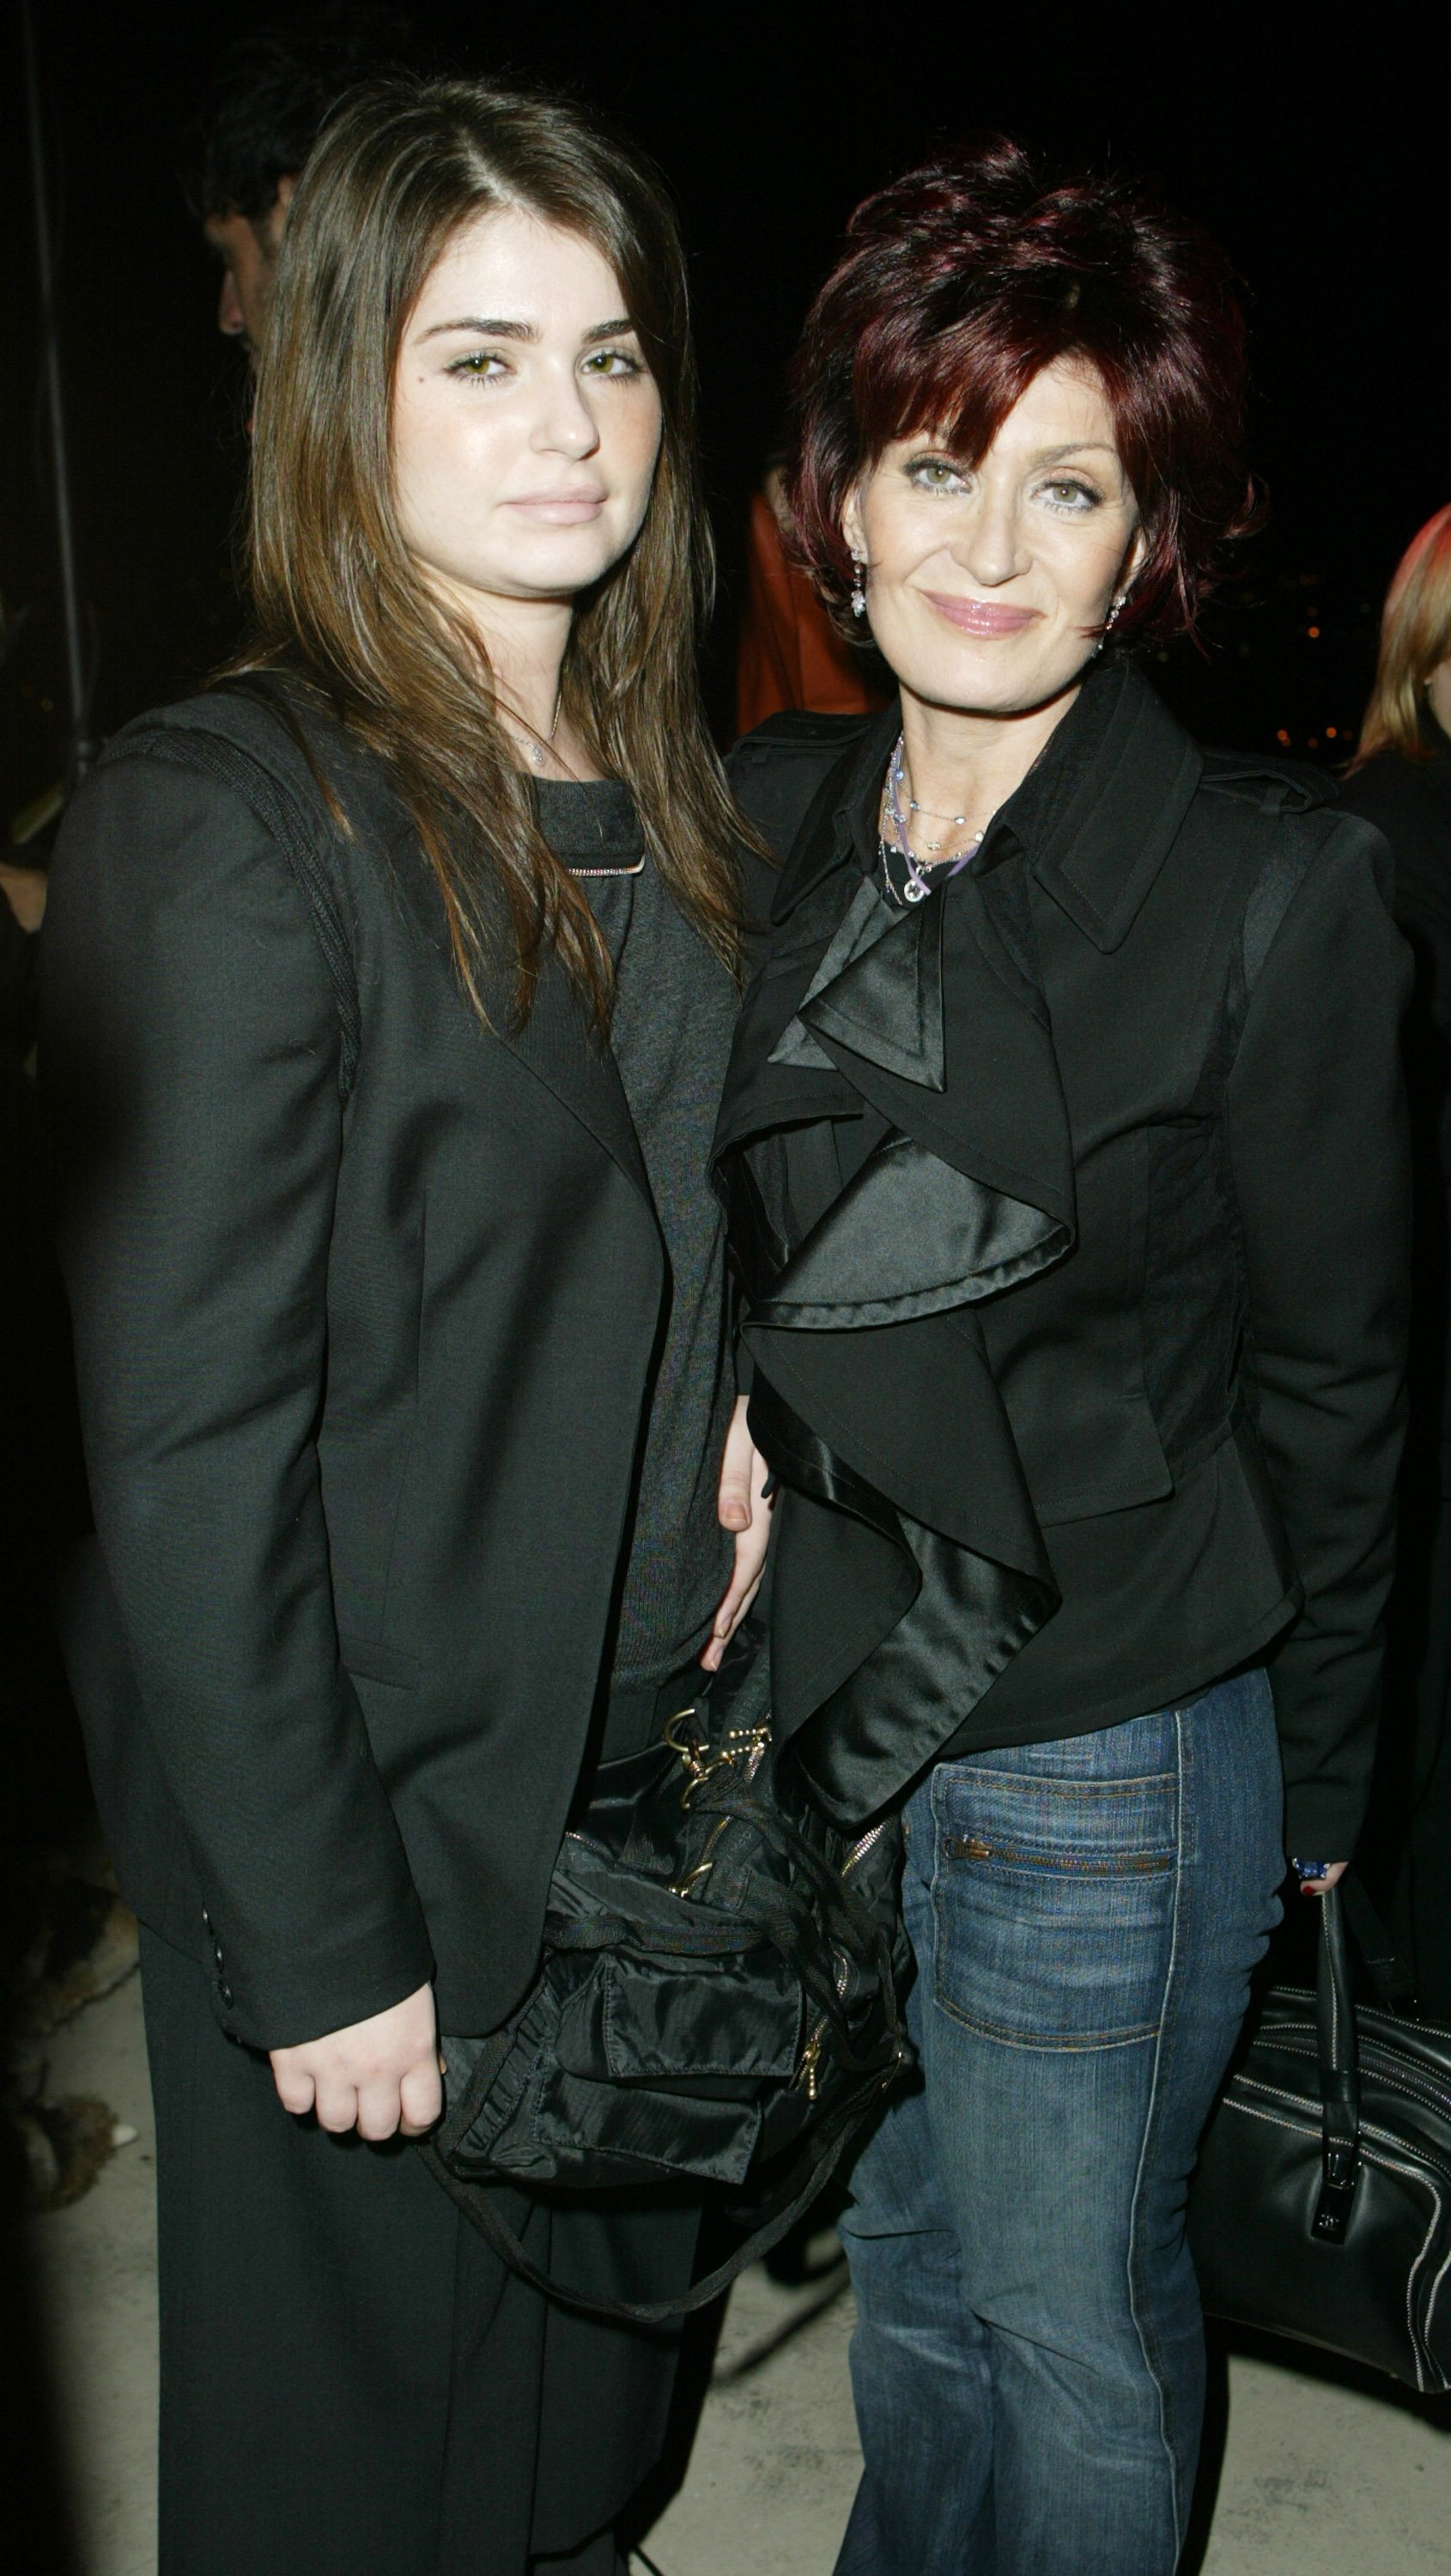 Aimee Osbourne and Sharon Osbourne during 'The Heart is Deceitful Above All Things' Wrap Party at Chateau Marmont